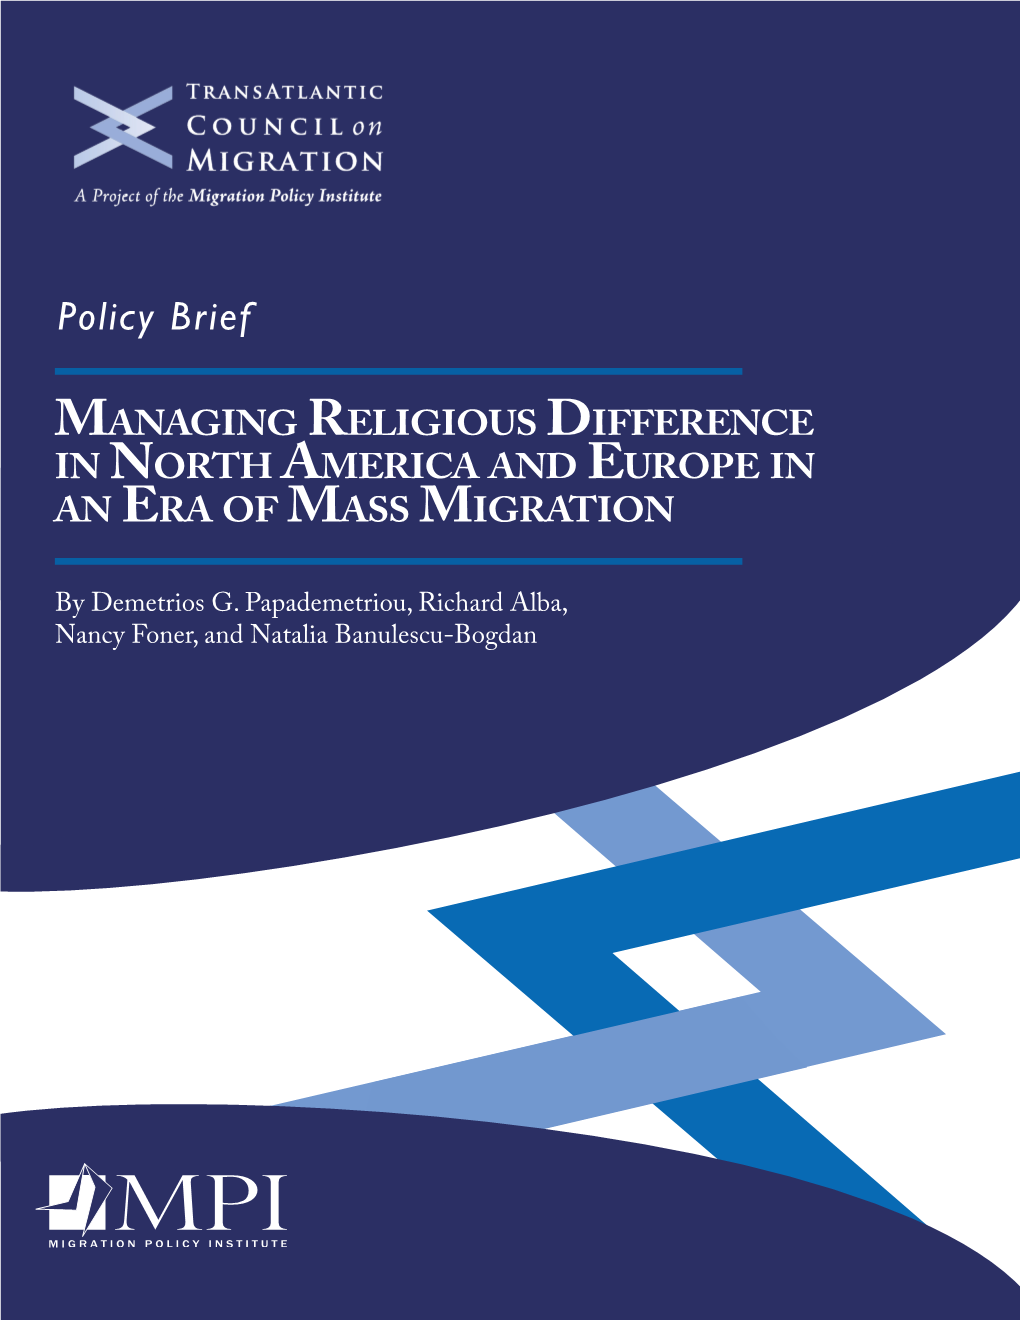 Managing Religious Difference in North America and Europe in an Era of Mass Migration